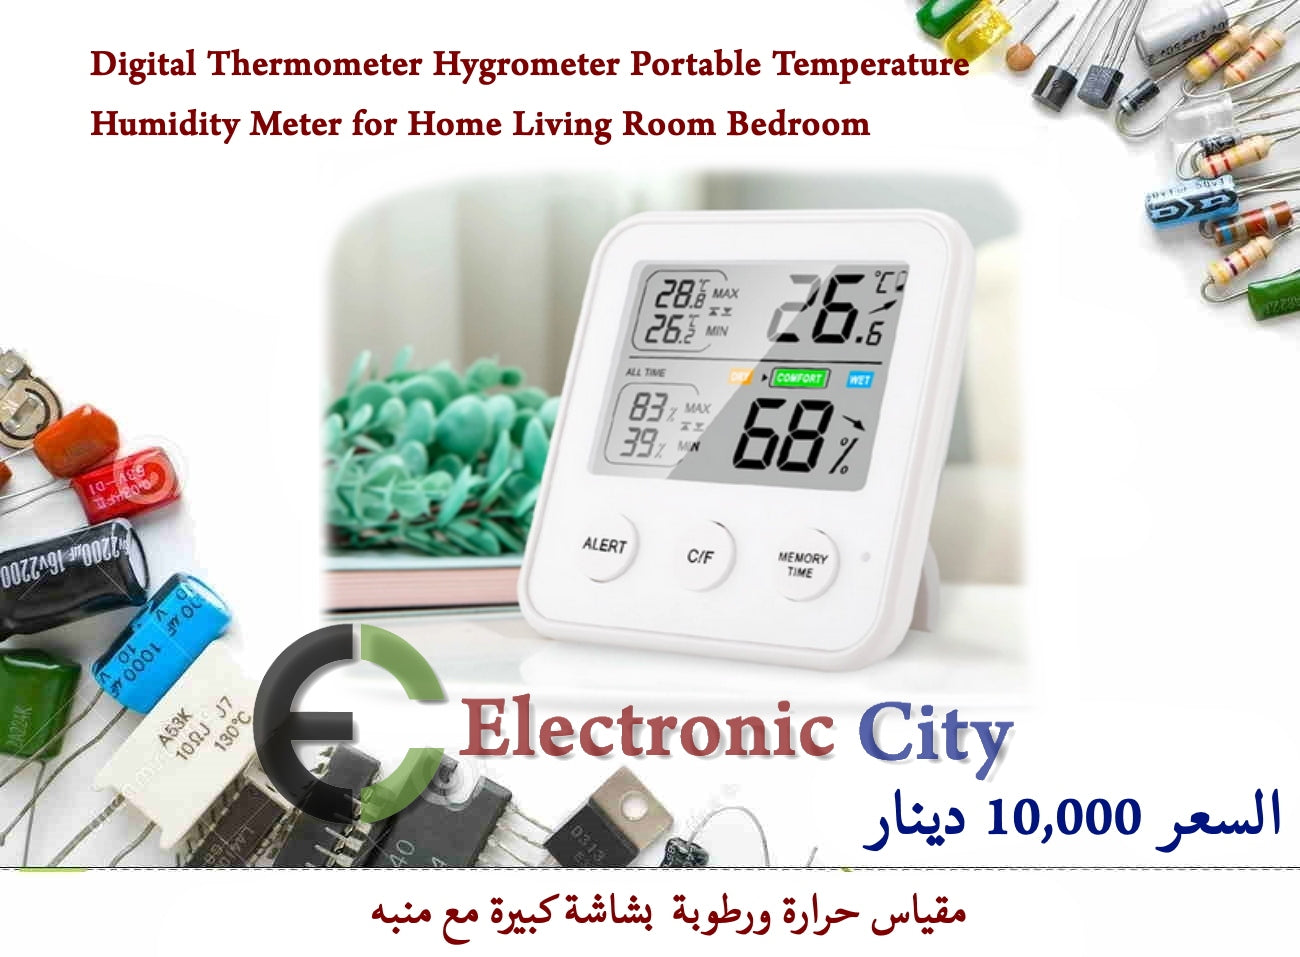 Digital Thermometer Hygrometer Portable Temperature Humidity Meter for Home Living Room Bedroom